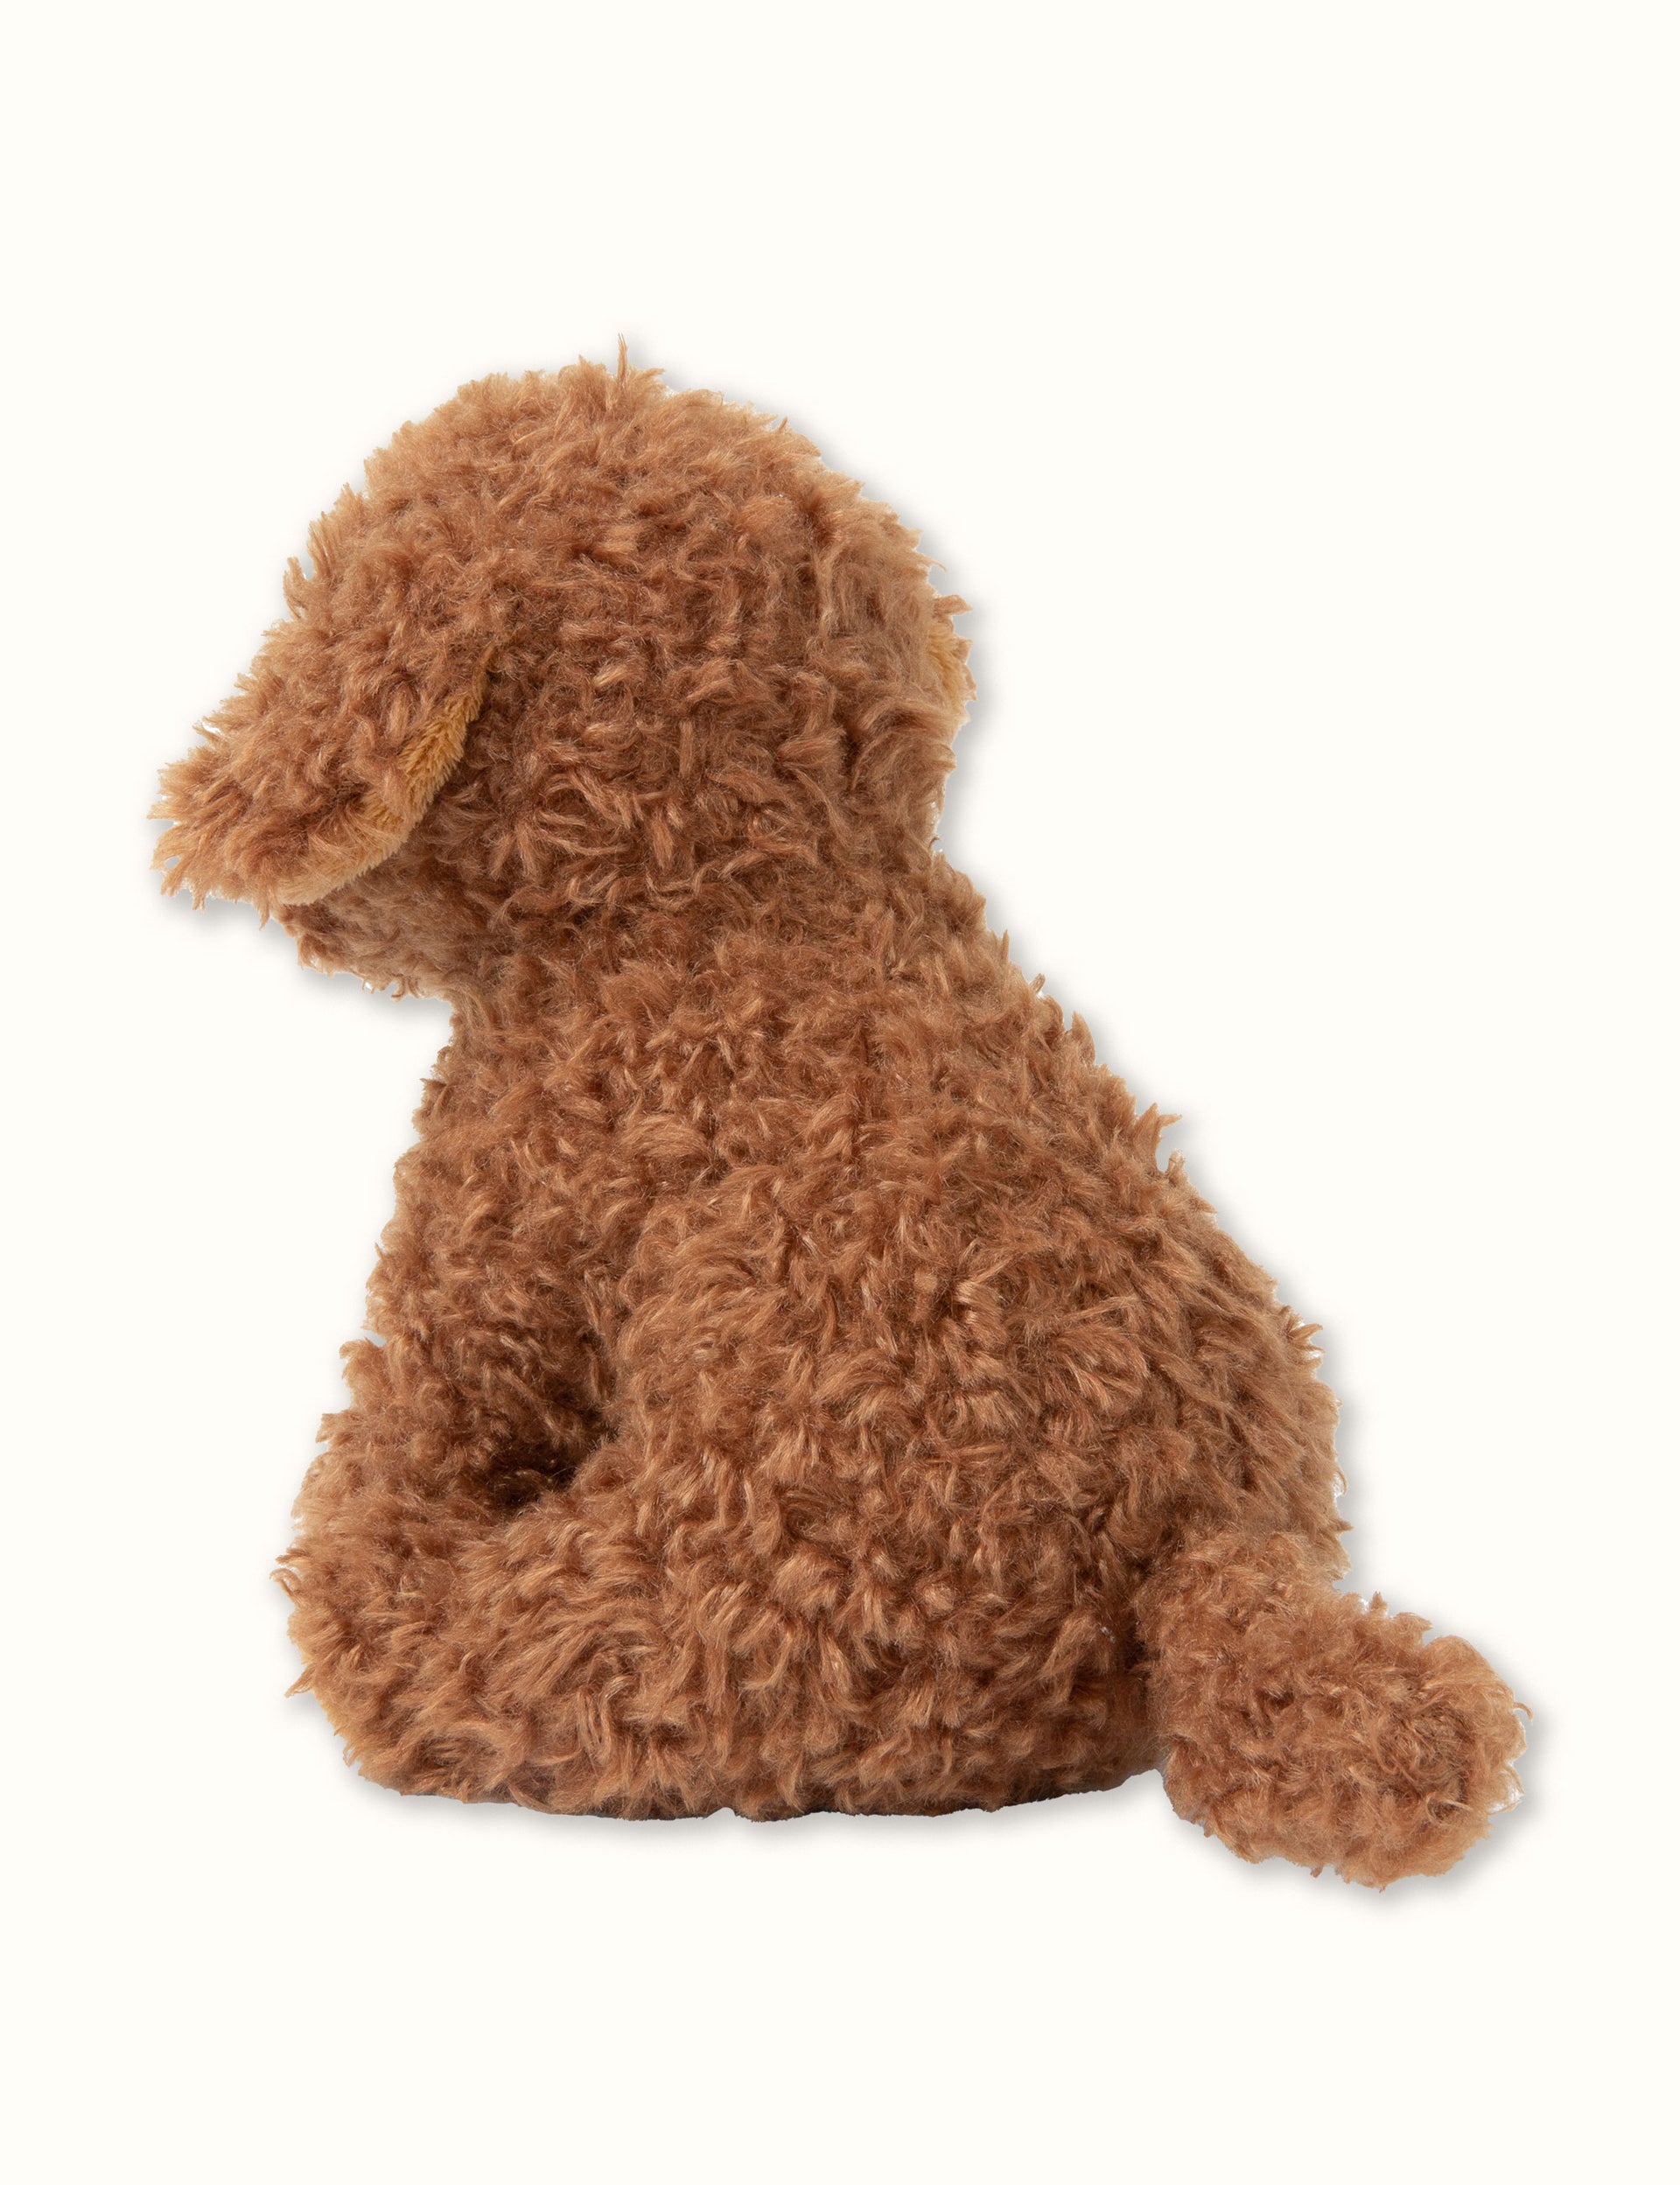 Stacy the Labradoodle Plush in giftbox 17cm